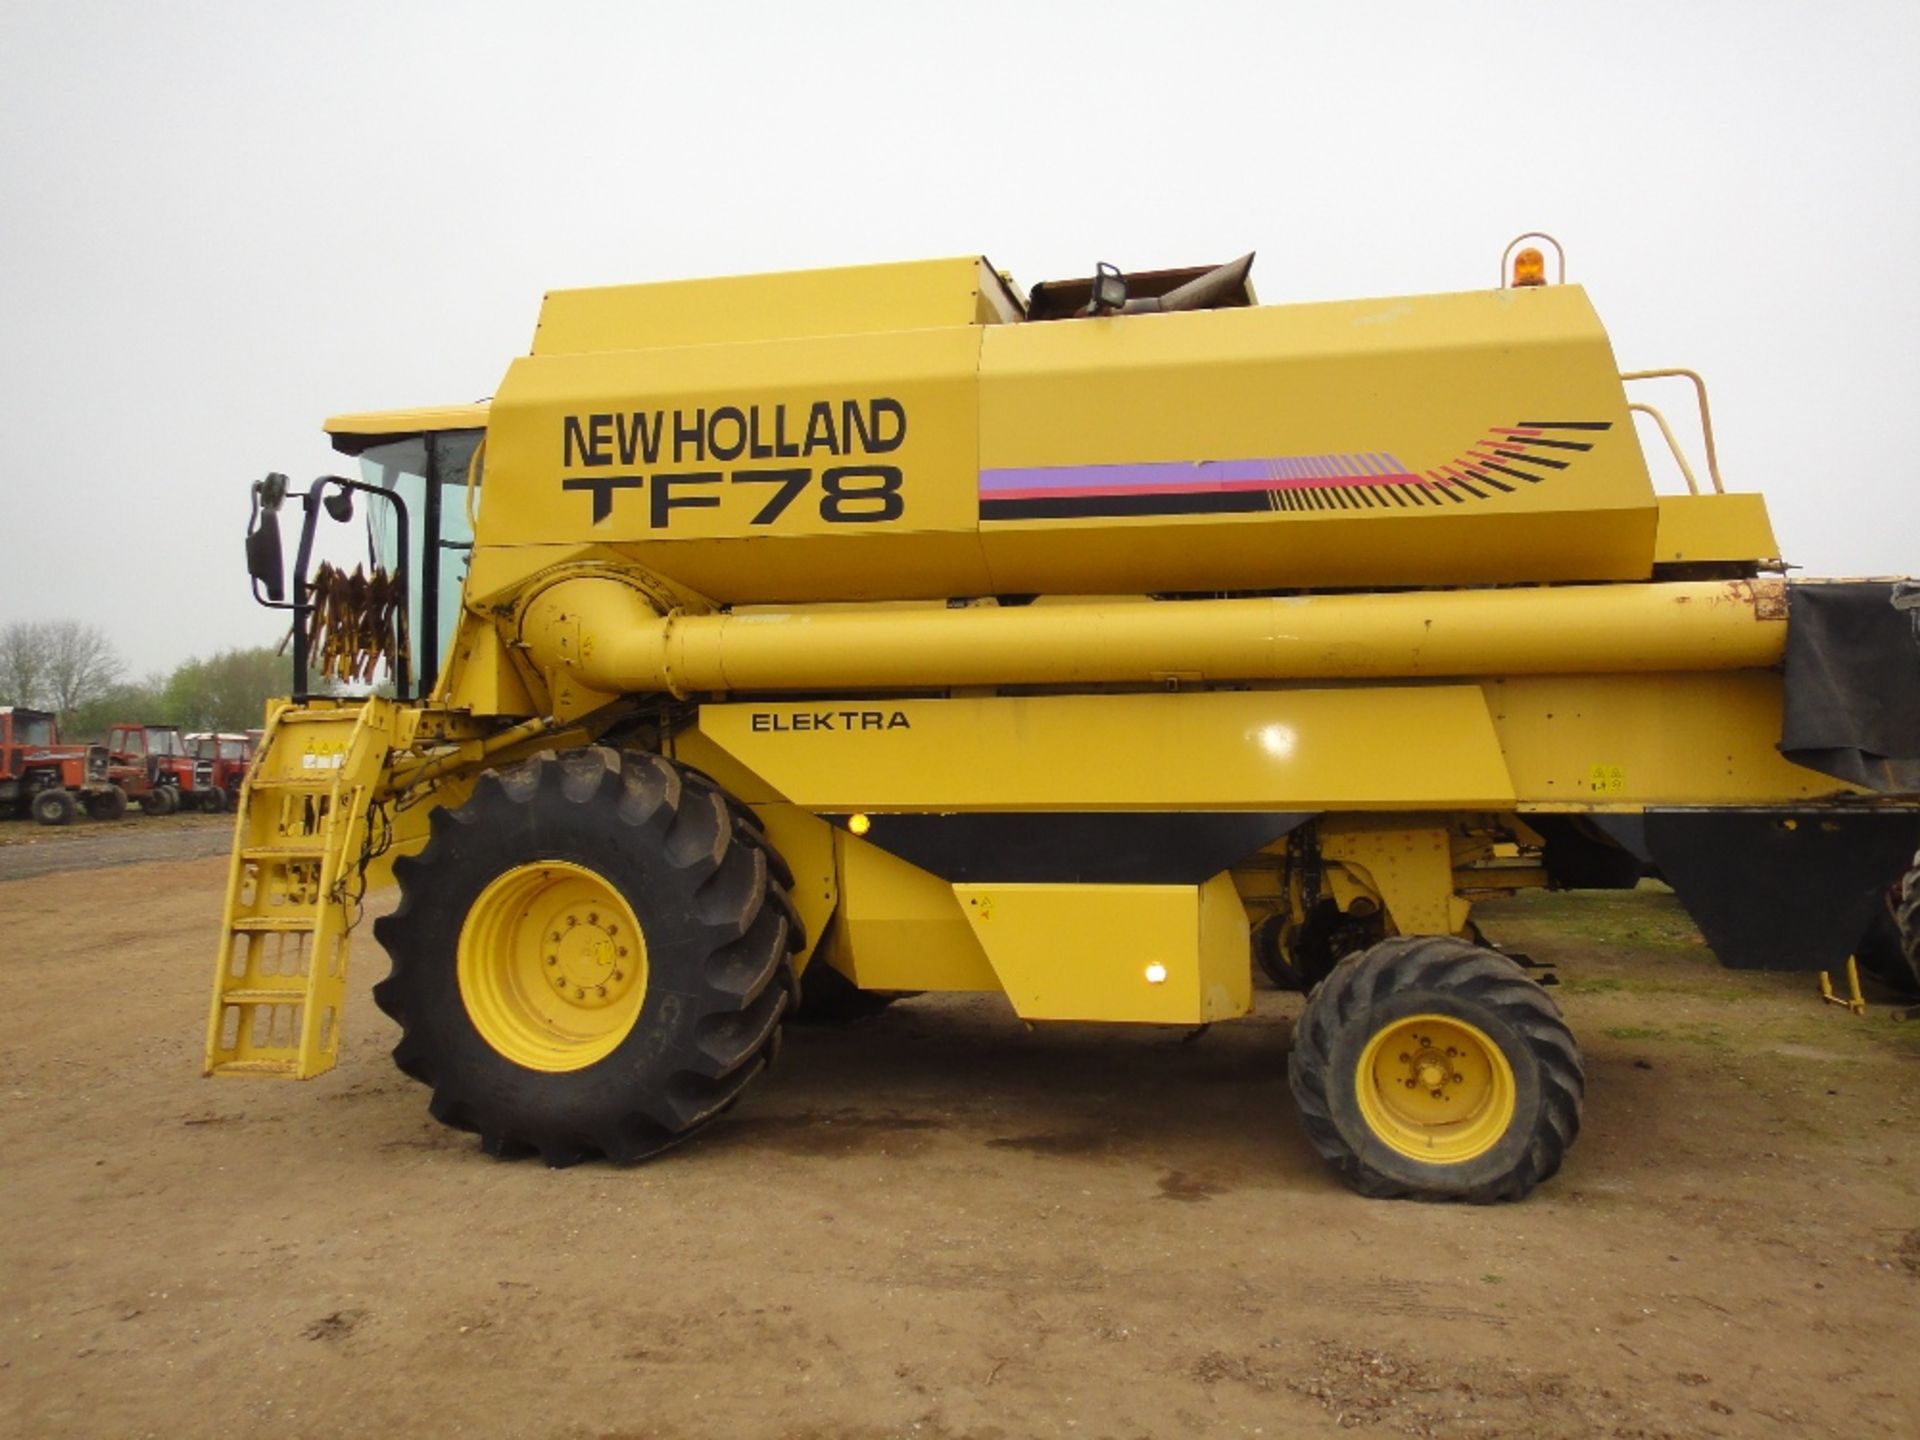 New Holland TF Elektra 78 Combine With 24ft Cut. P Reg. Ser.No.131661 - Image 2 of 12